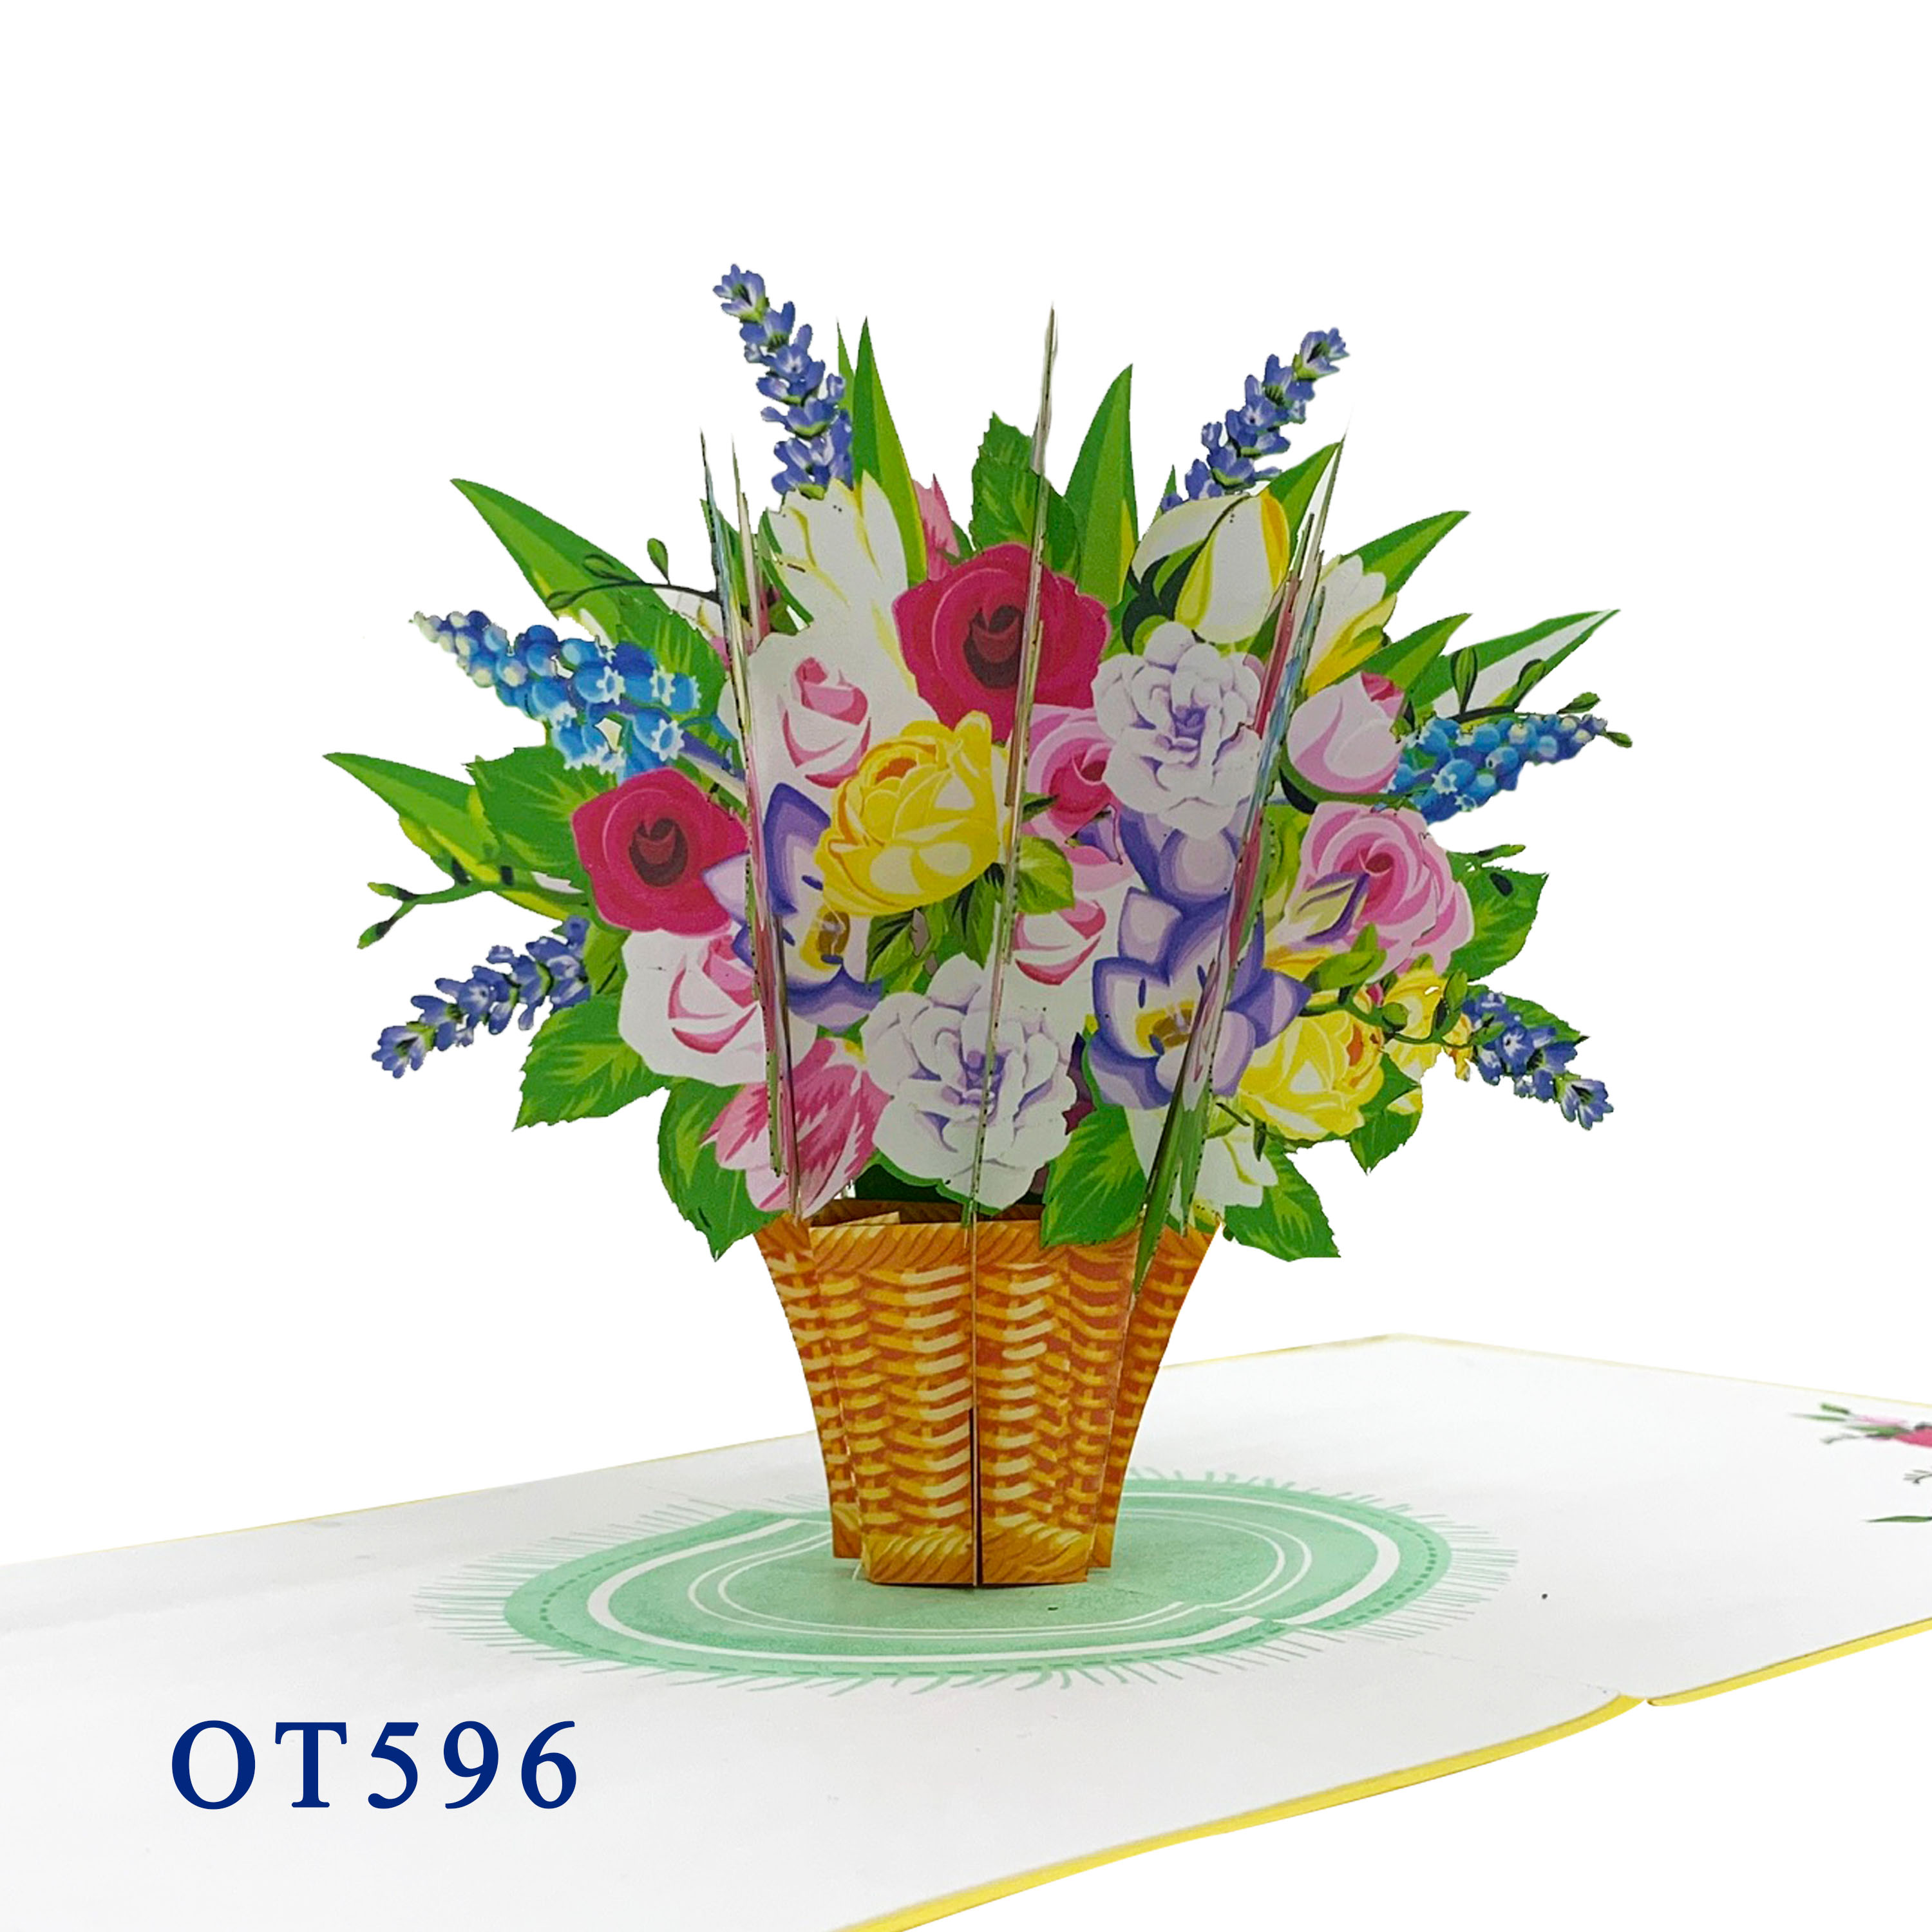 Flower basket Drawing, How to draw Flower basket step by step - YouTube